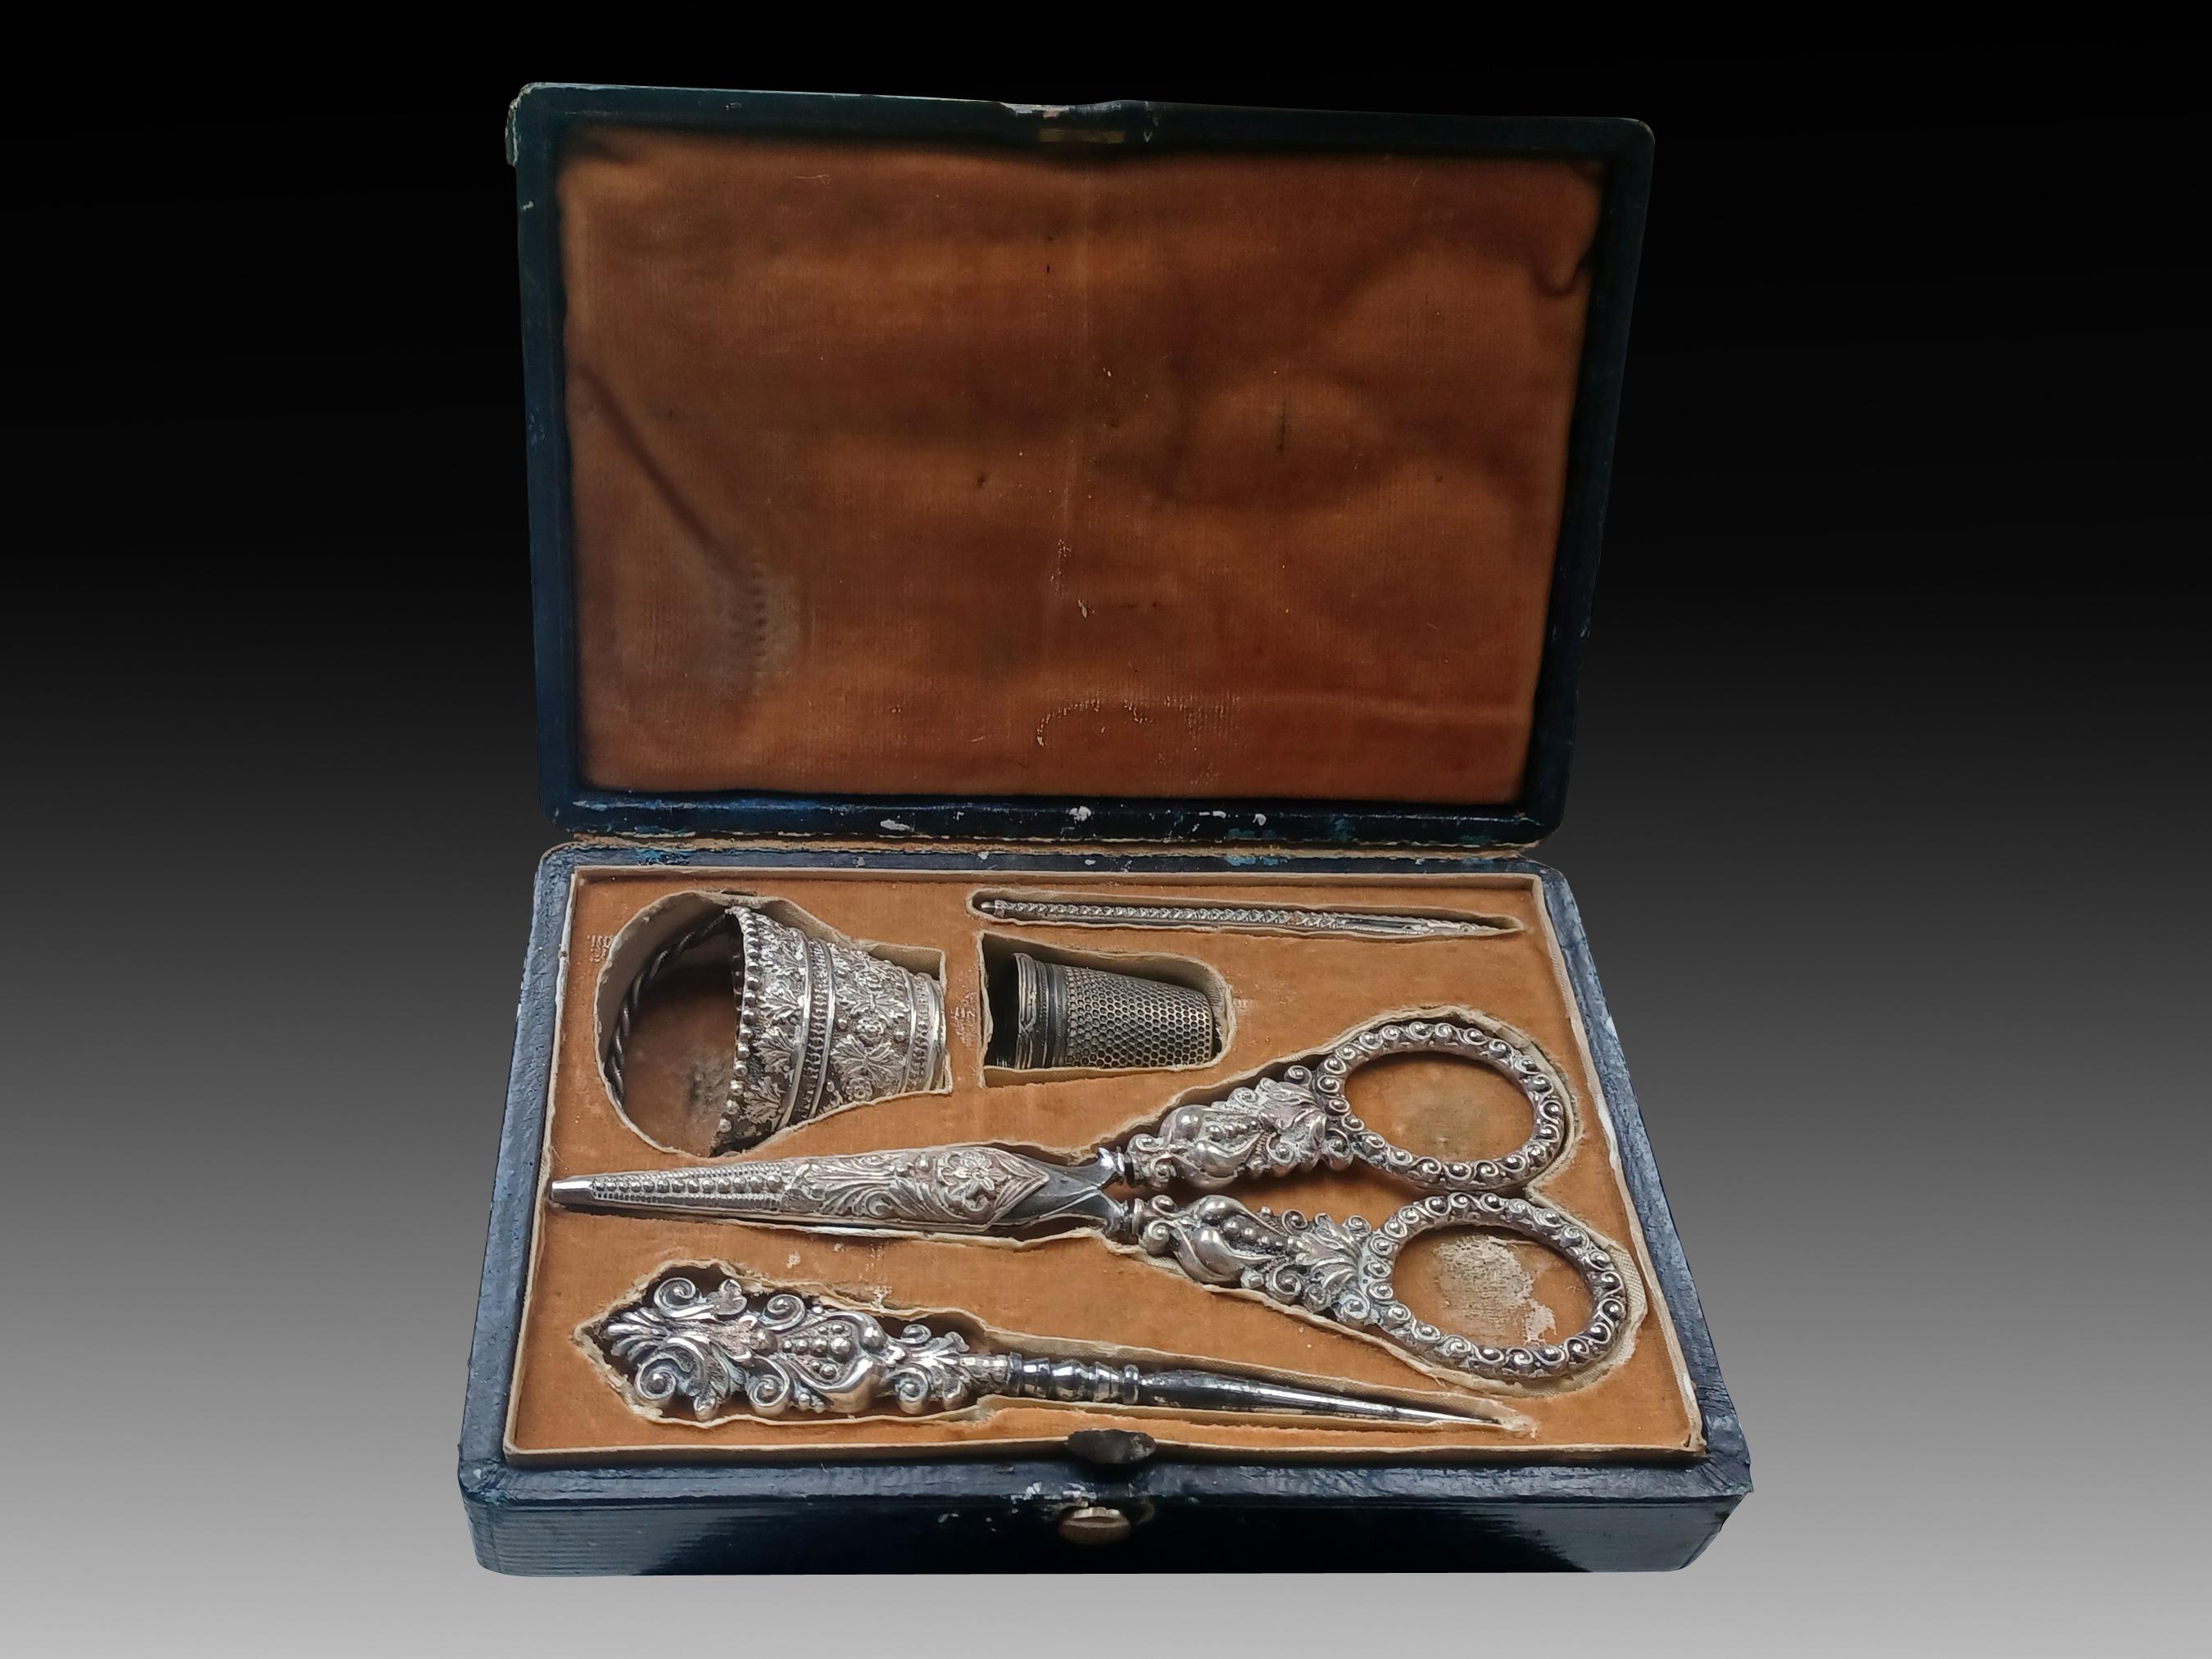 Rare Antique George IV Lady’s Solid Silver Sewing Necessaire with Original Case, est. 1825 

A truly rare piece of life in the early 1800s blind-rolled in the classical taste with Morocco bindings and silver-hafted instruments, including a